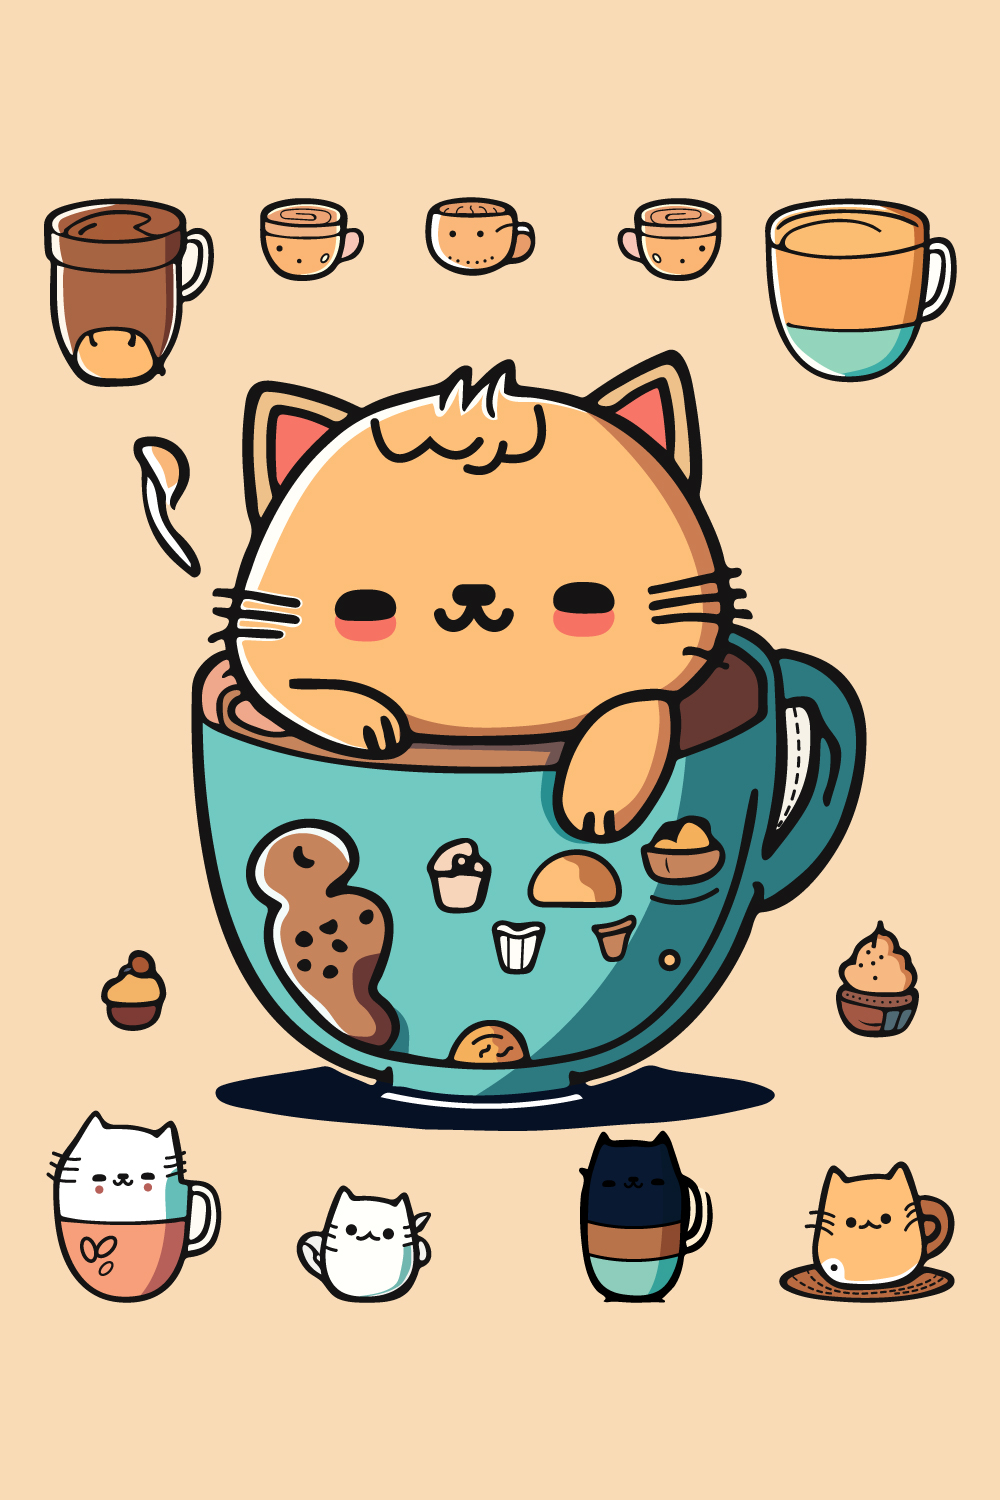 Coffee Cup Logo, Cute Coffee Cup Cartoon line art colorful Vector Illustration, Coffee cup icon design, Flat carton style, and Food and drink icon pinterest preview image.